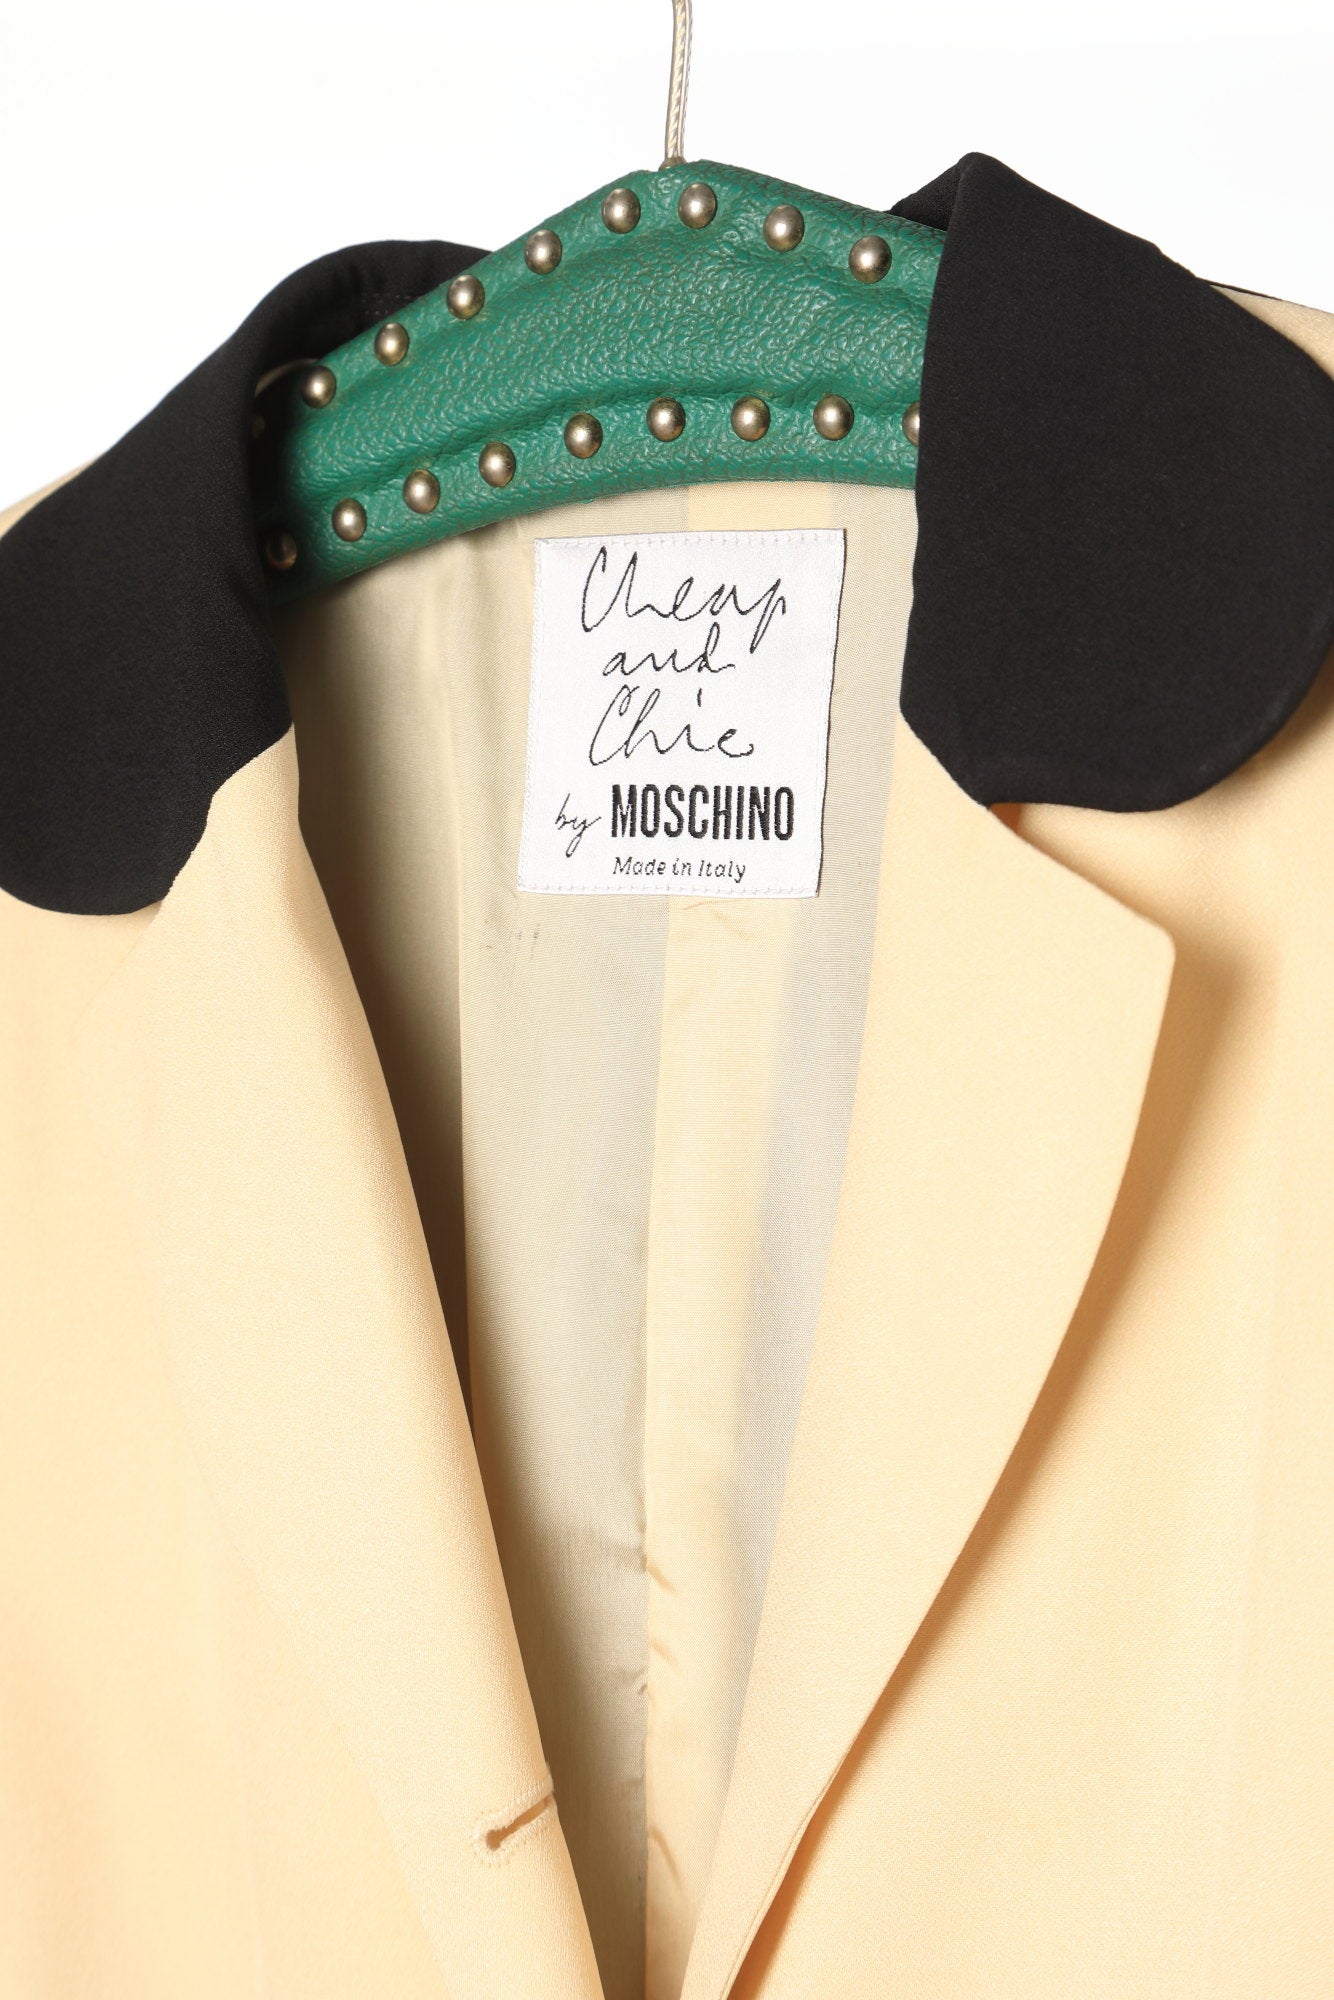 Moschino Cheap and Chic suit